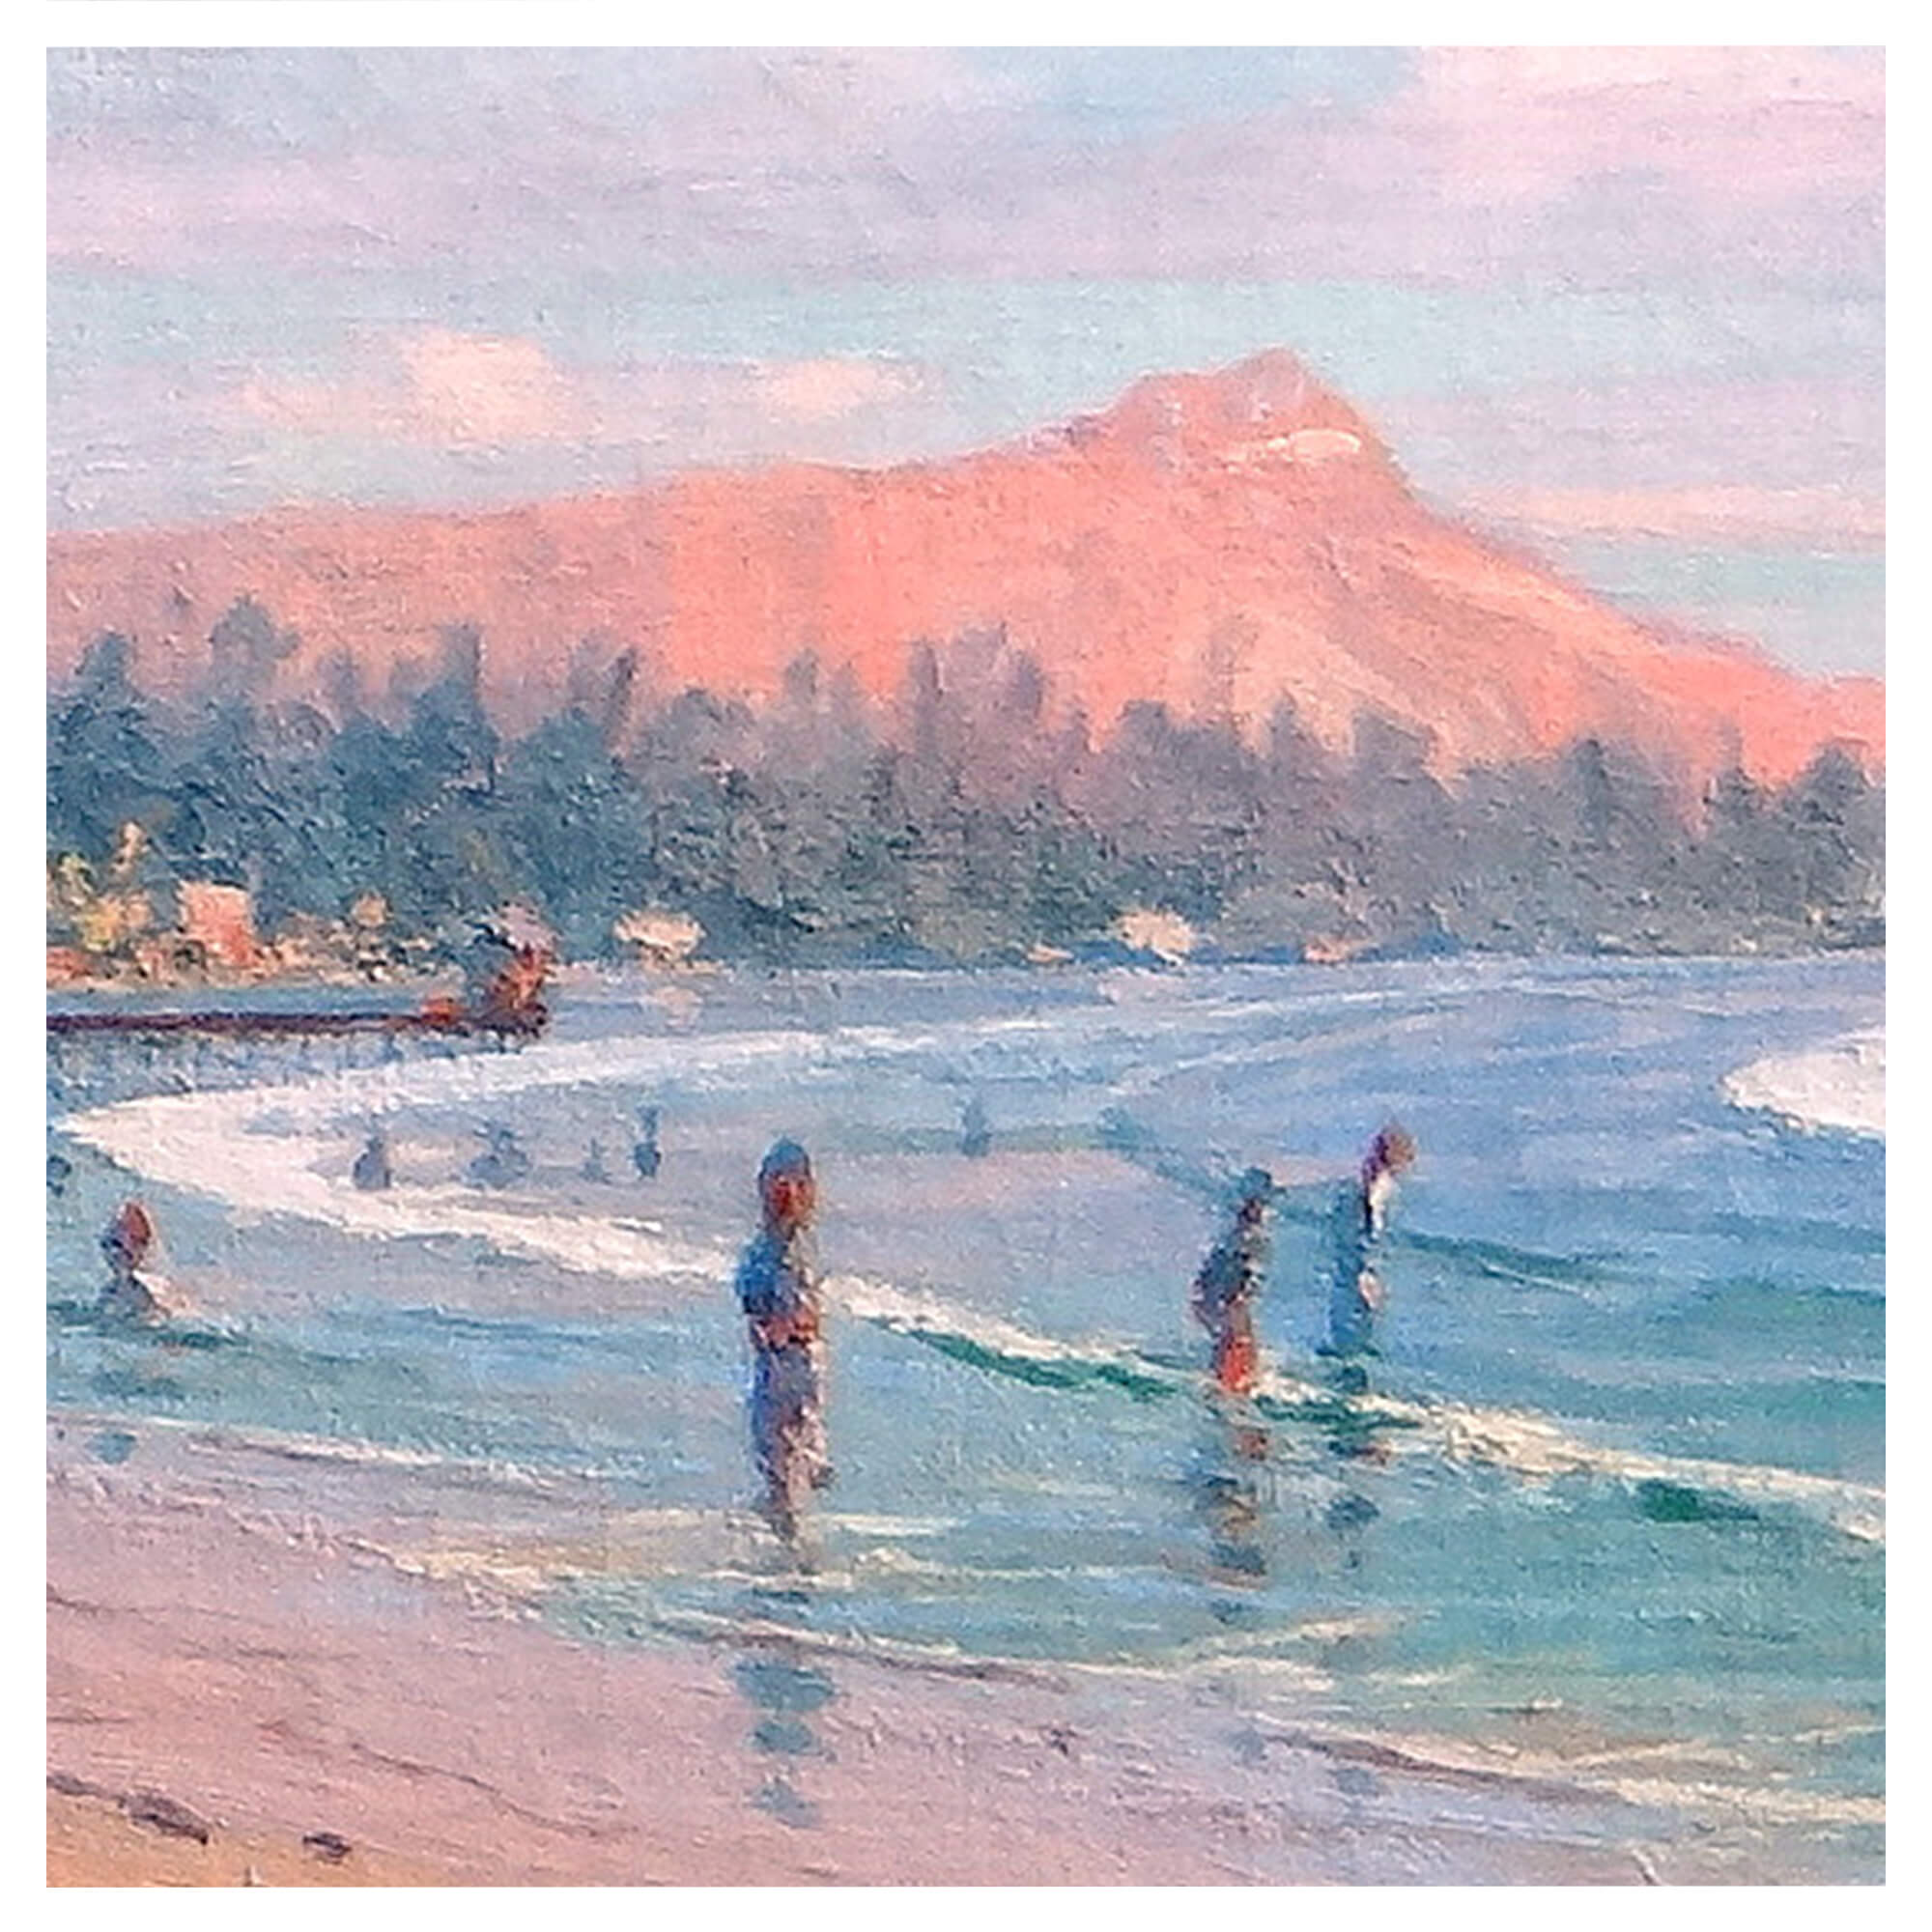 An illustration featuring the calm wave by hawaii artist  David Hitchcock